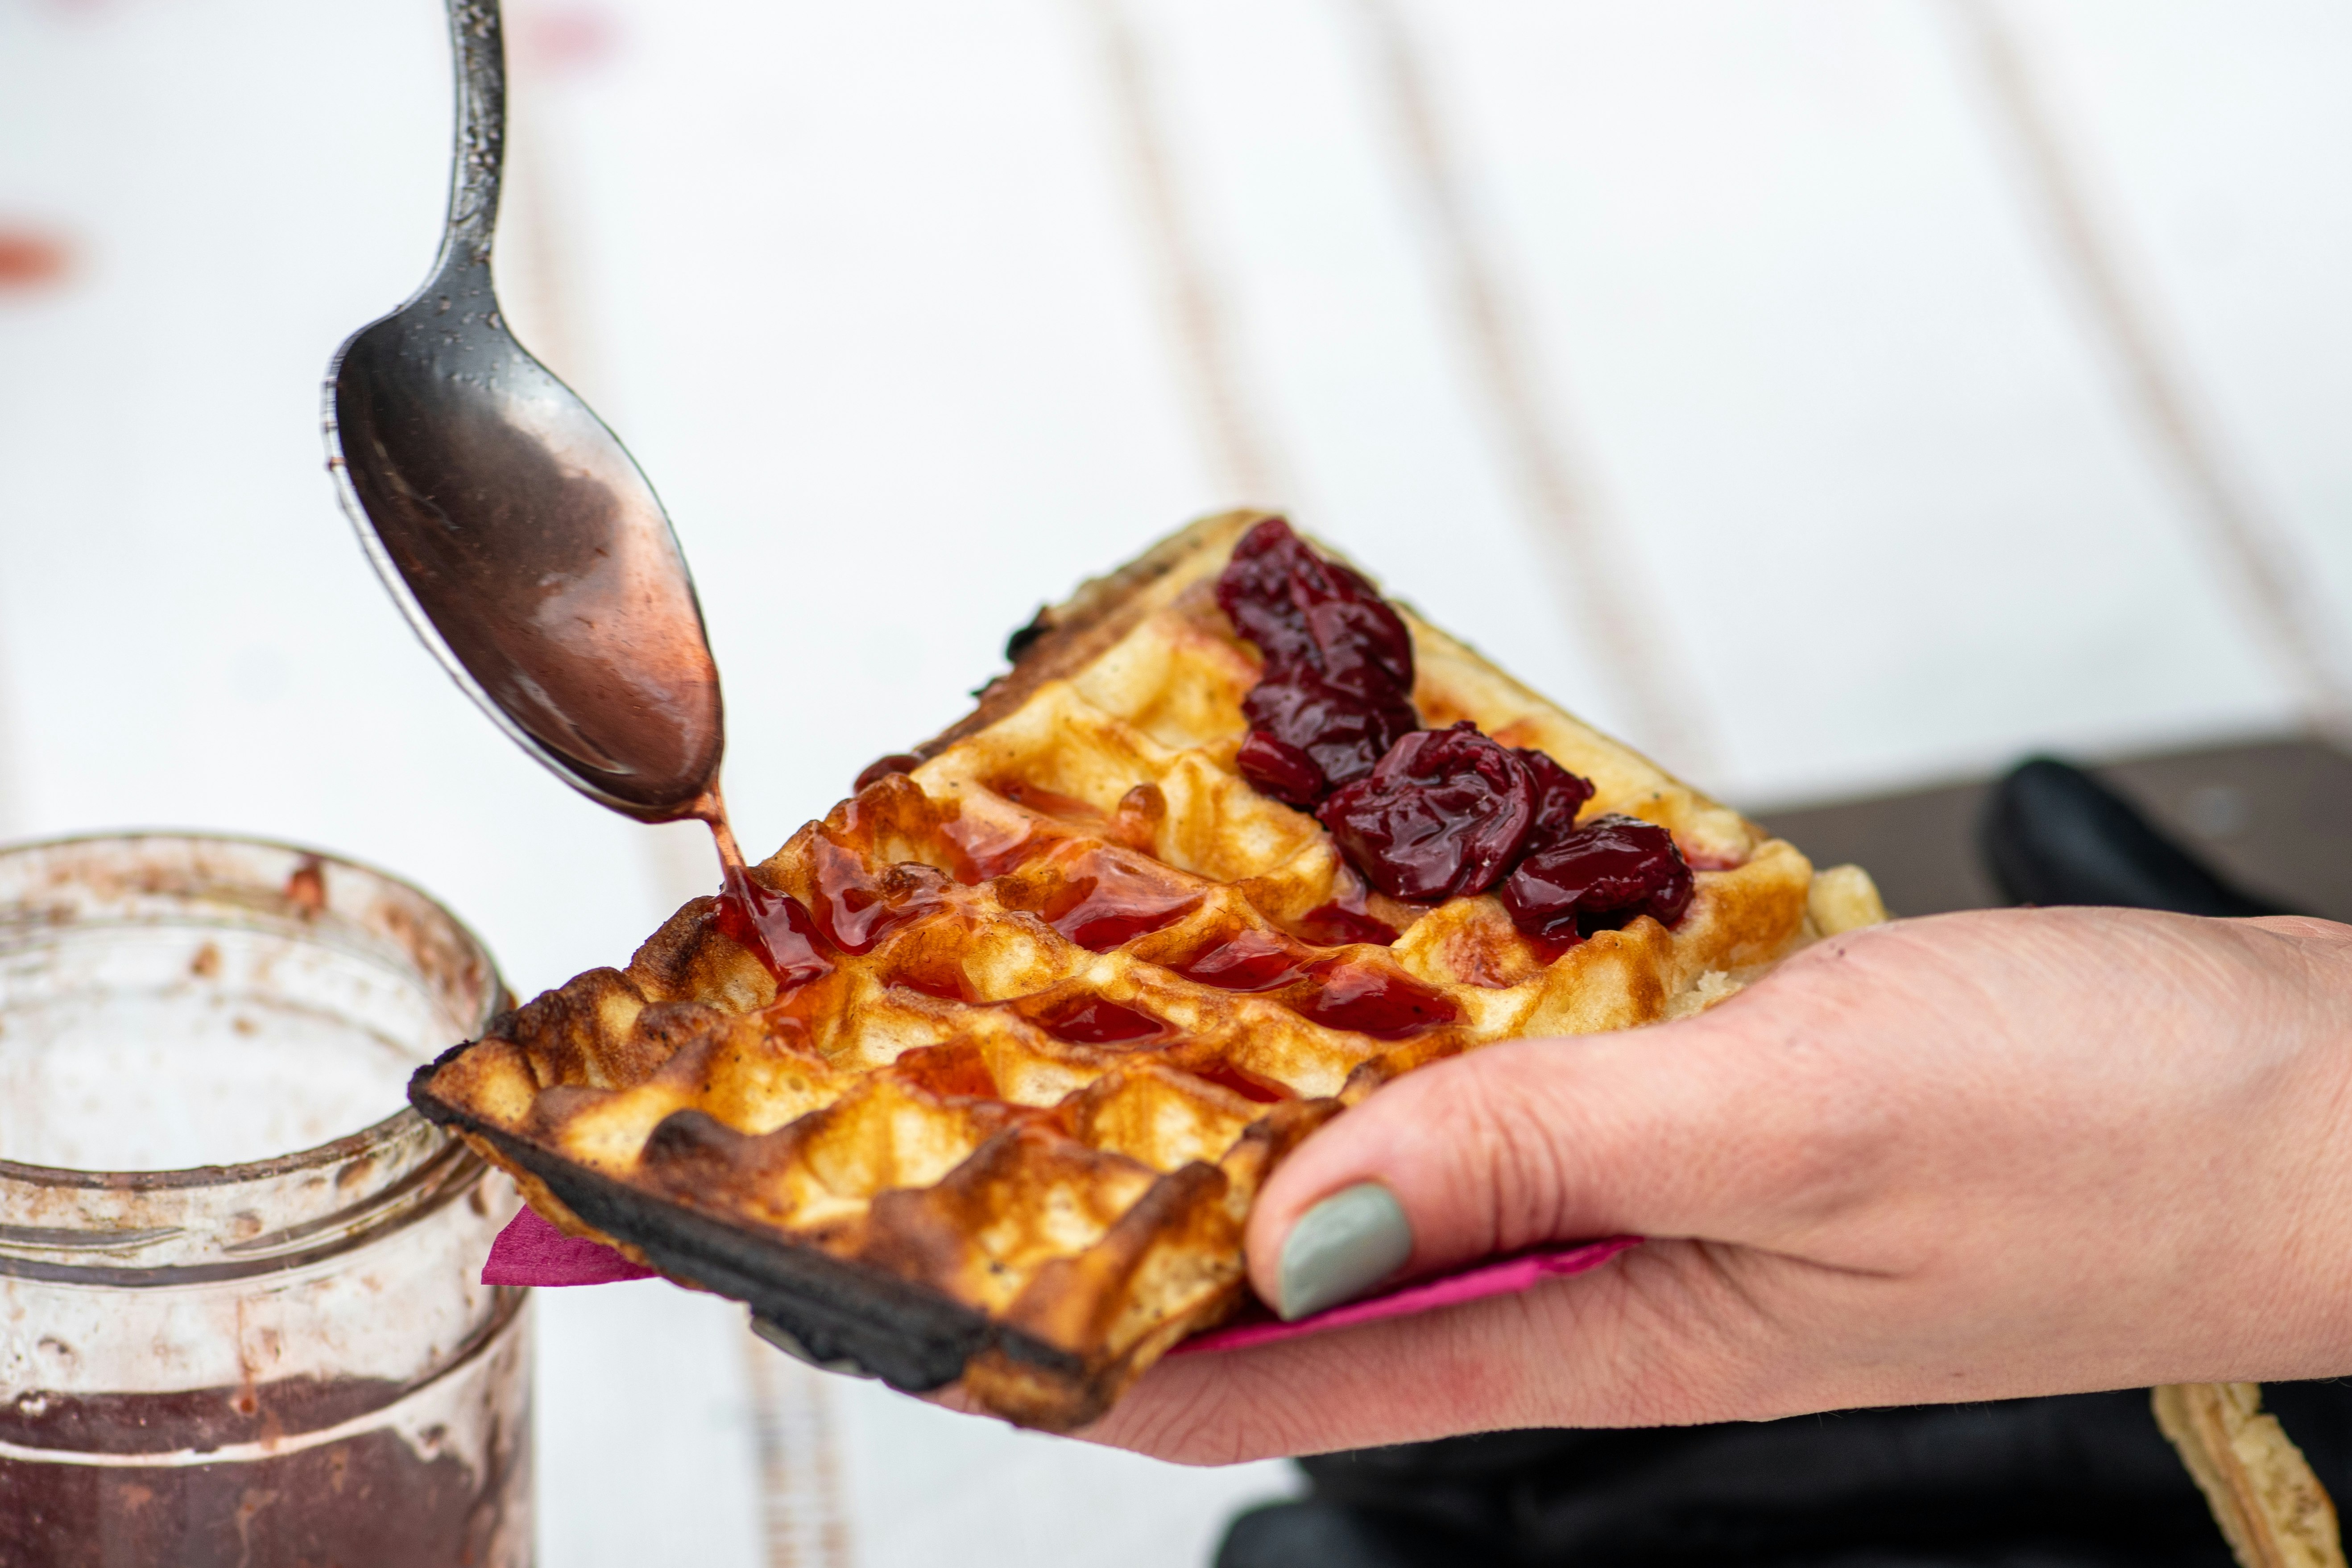 Preparing waffle or waffles with jam, dish made from leavened batter or dough that is cooked between two plates that are patterned to give a characteristic size, shape, and surface impression